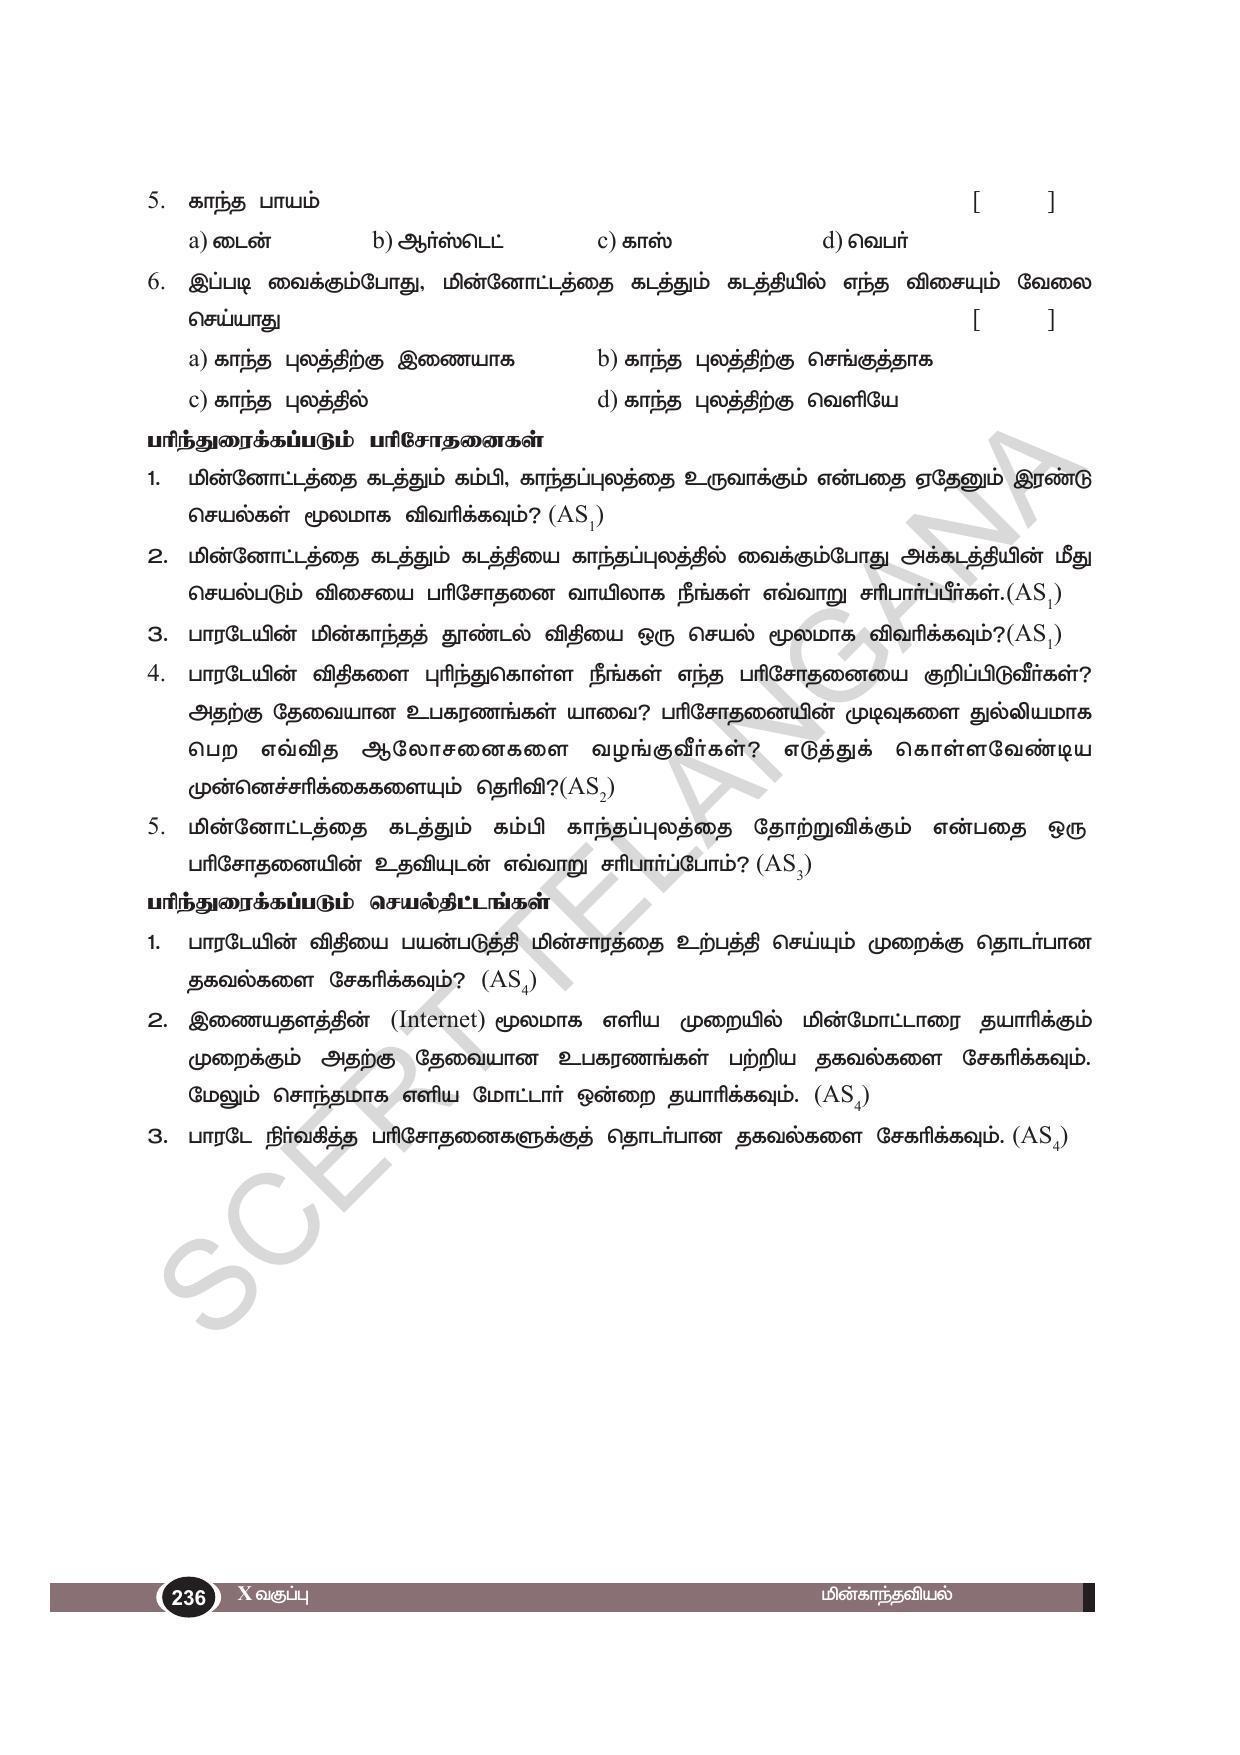 TS SCERT Class 10 Physical Science(Tamil Medium) Text Book - Page 248